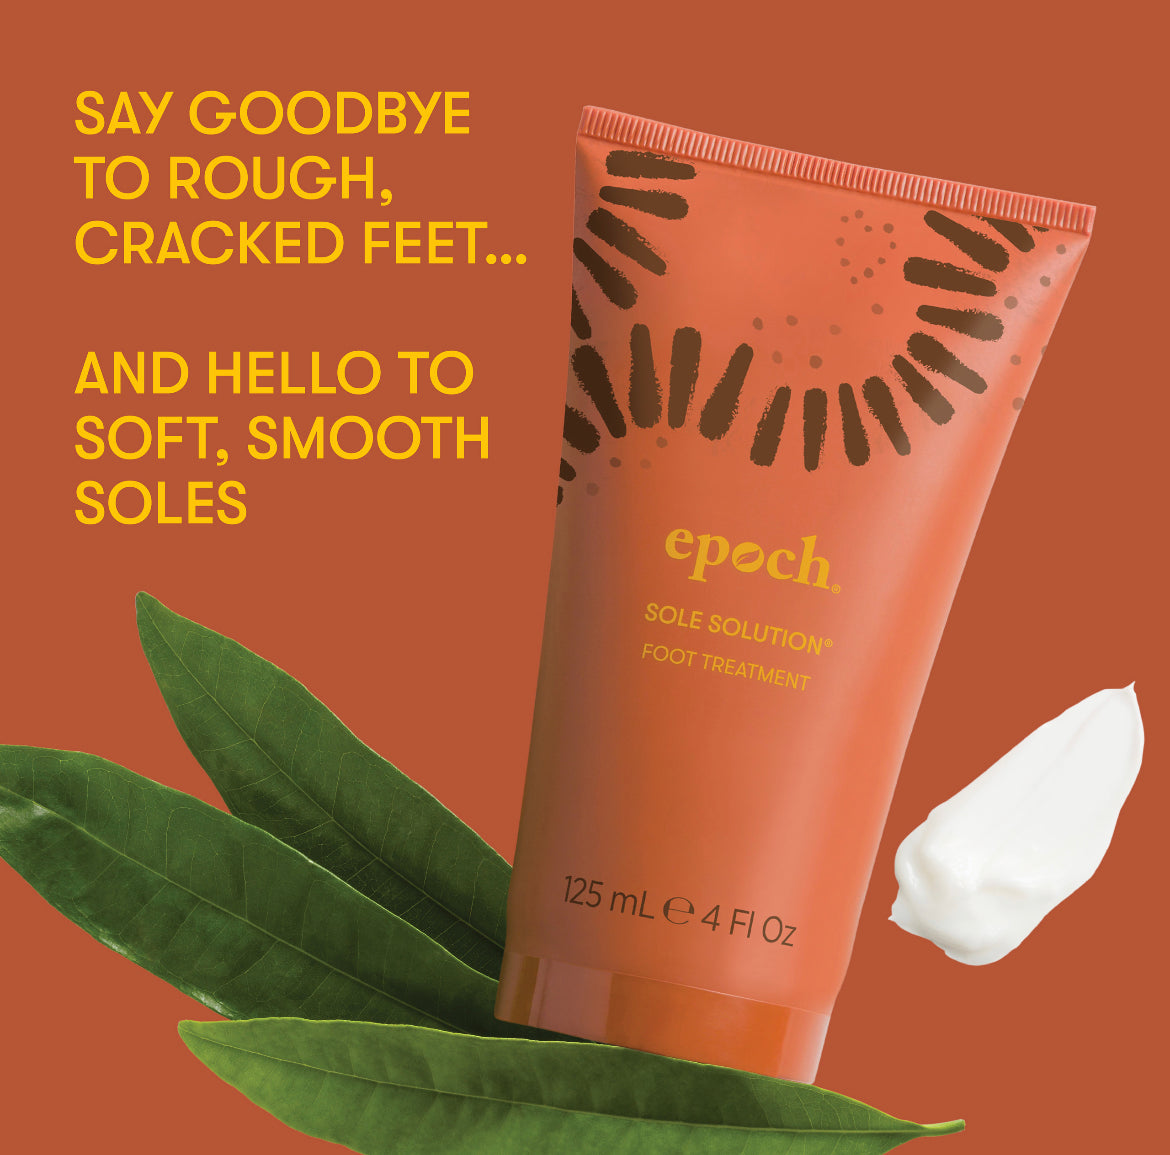 Epoch® Sole Solution® Foot TreatmentBuy Epoch® Sole Solution® Foot Treatment
* Discount will apply at checkout. 
Embrace smooth, soft feet all the way down to your soles. Harnessing the natural benefitEpoch® Sole Solution® Foot Treatment